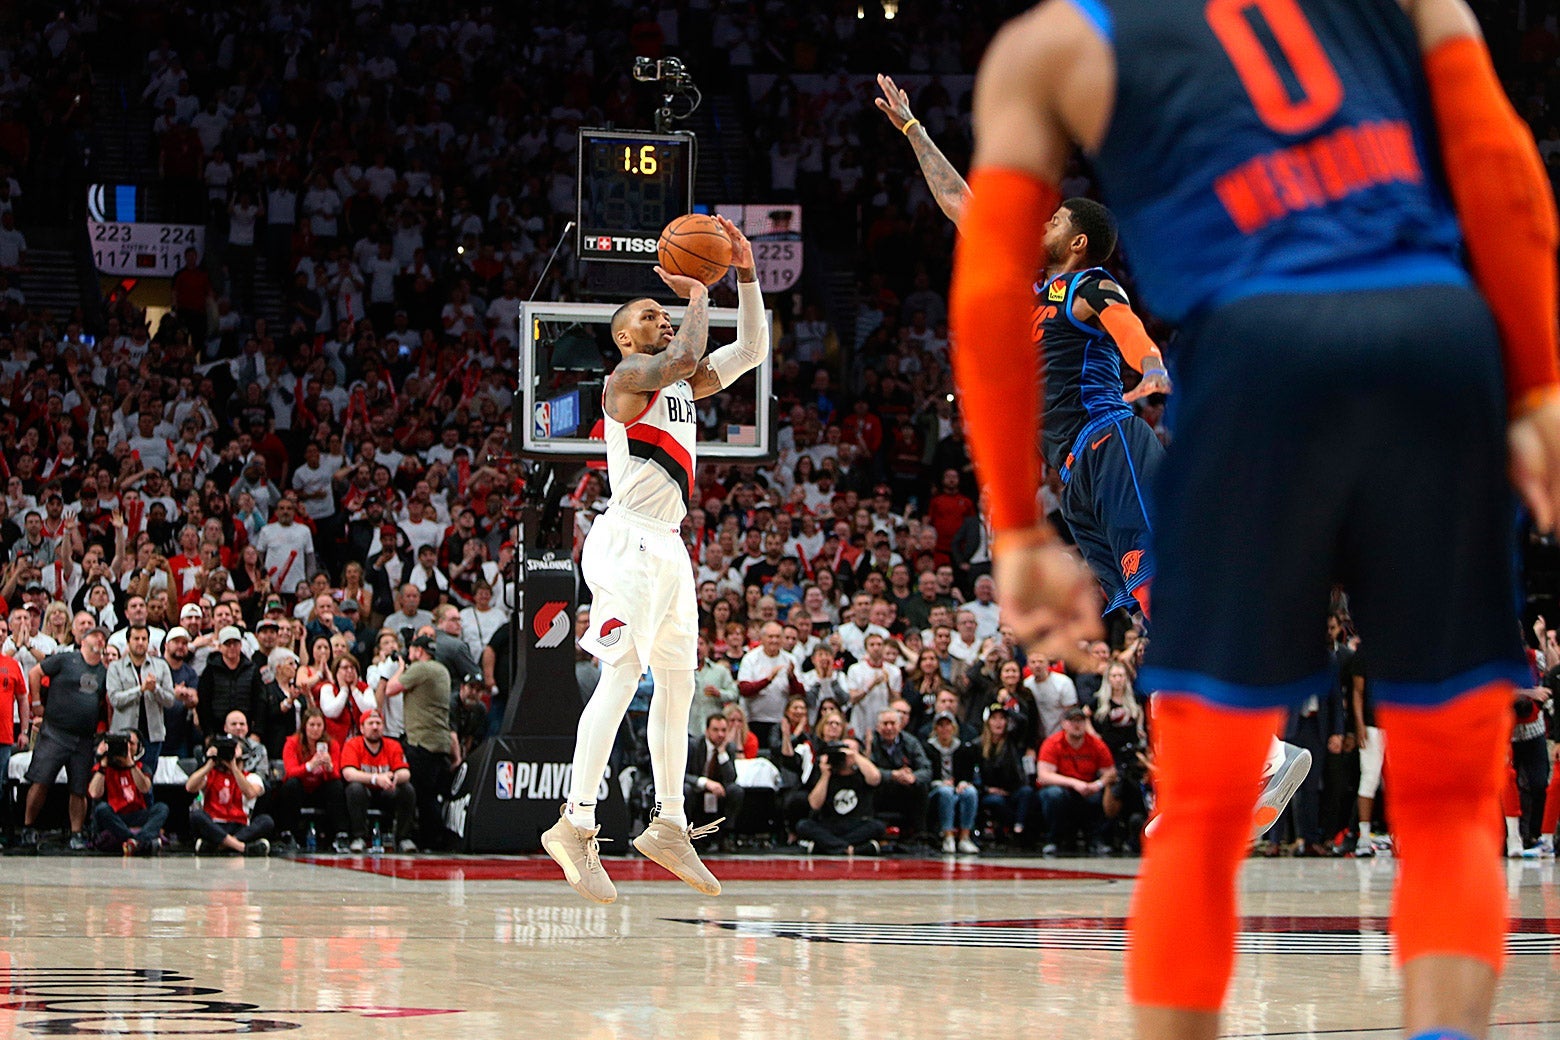 Damian Lillard shoots the game-winning three-pointer to beat the Oklahoma City Thunder 118-115 in Game 5 of the first round of the NBA Playoffs on April 23, 2019.